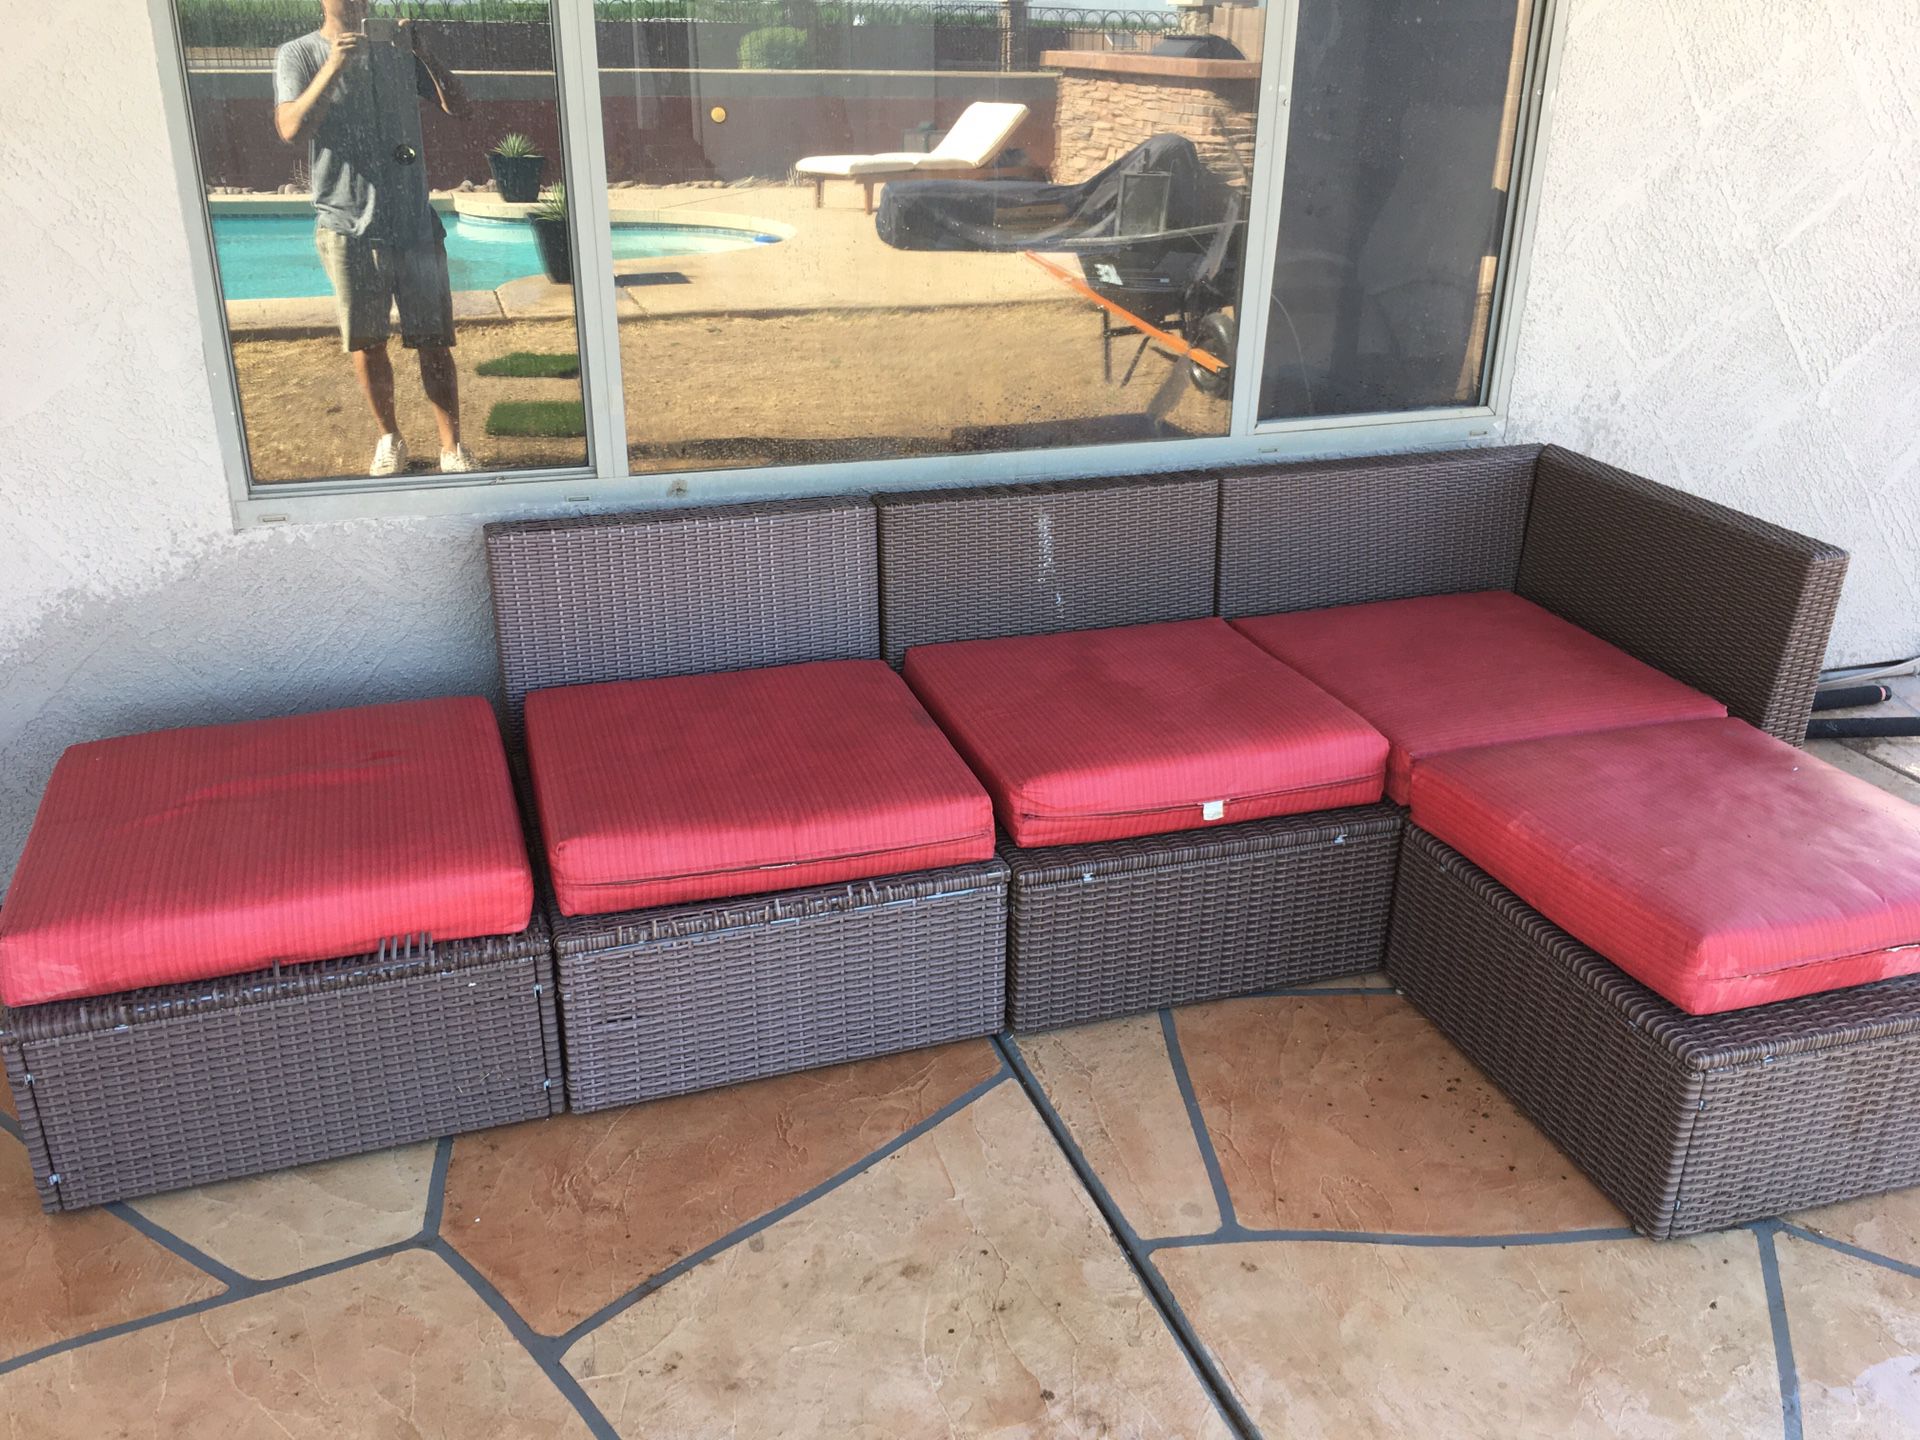 Wicker outdoor set patio furniture w cushions $150 see pics